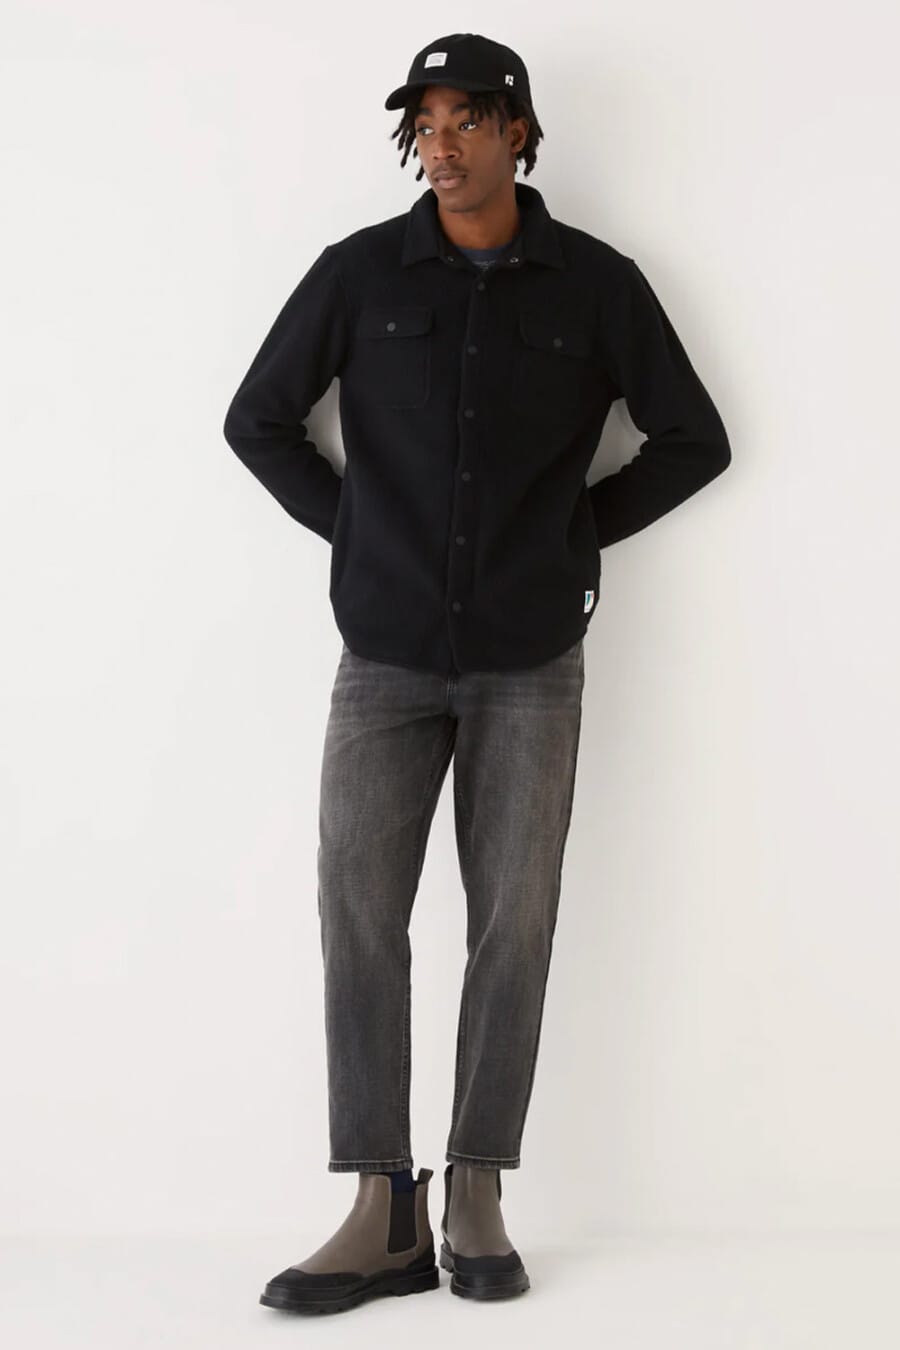 Men's dark grey jeans, black overshirt, black baseball cap and grey leather Chelsea boots outfit